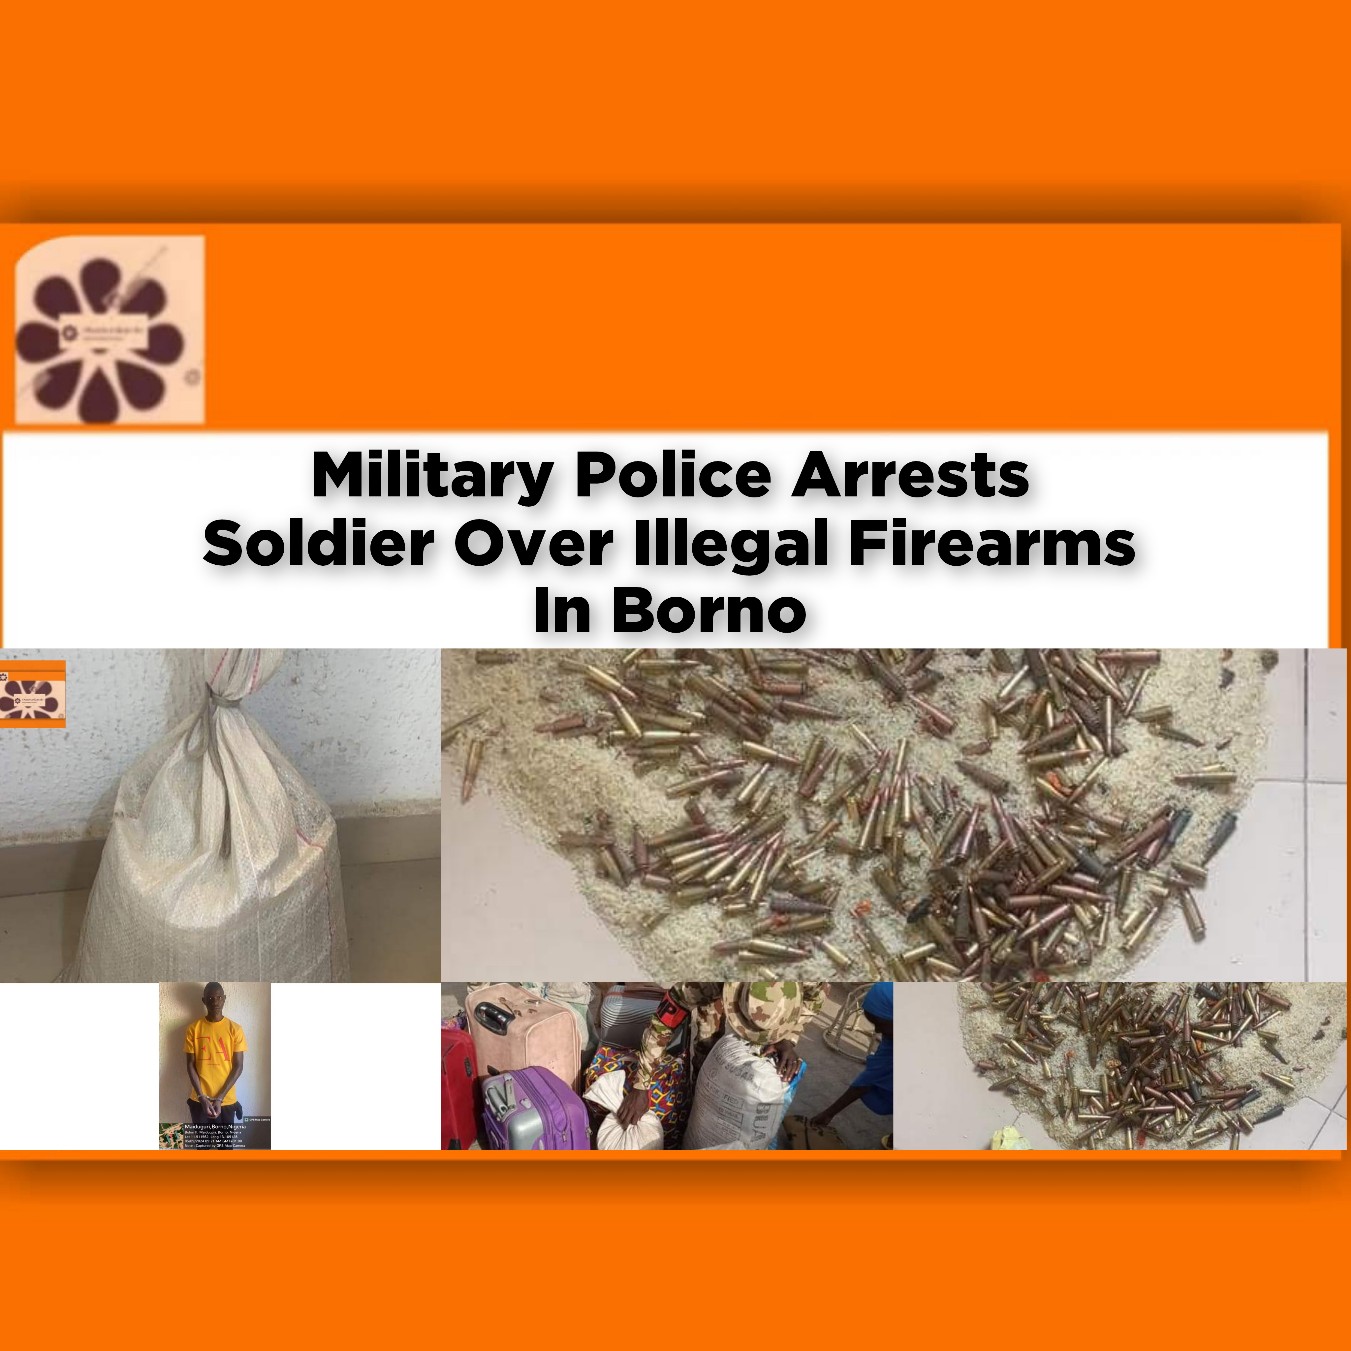 Military Police Arrests Soldier Over Illegal Firearms In Borno ~ OsazuwaAkonedo #Doctors